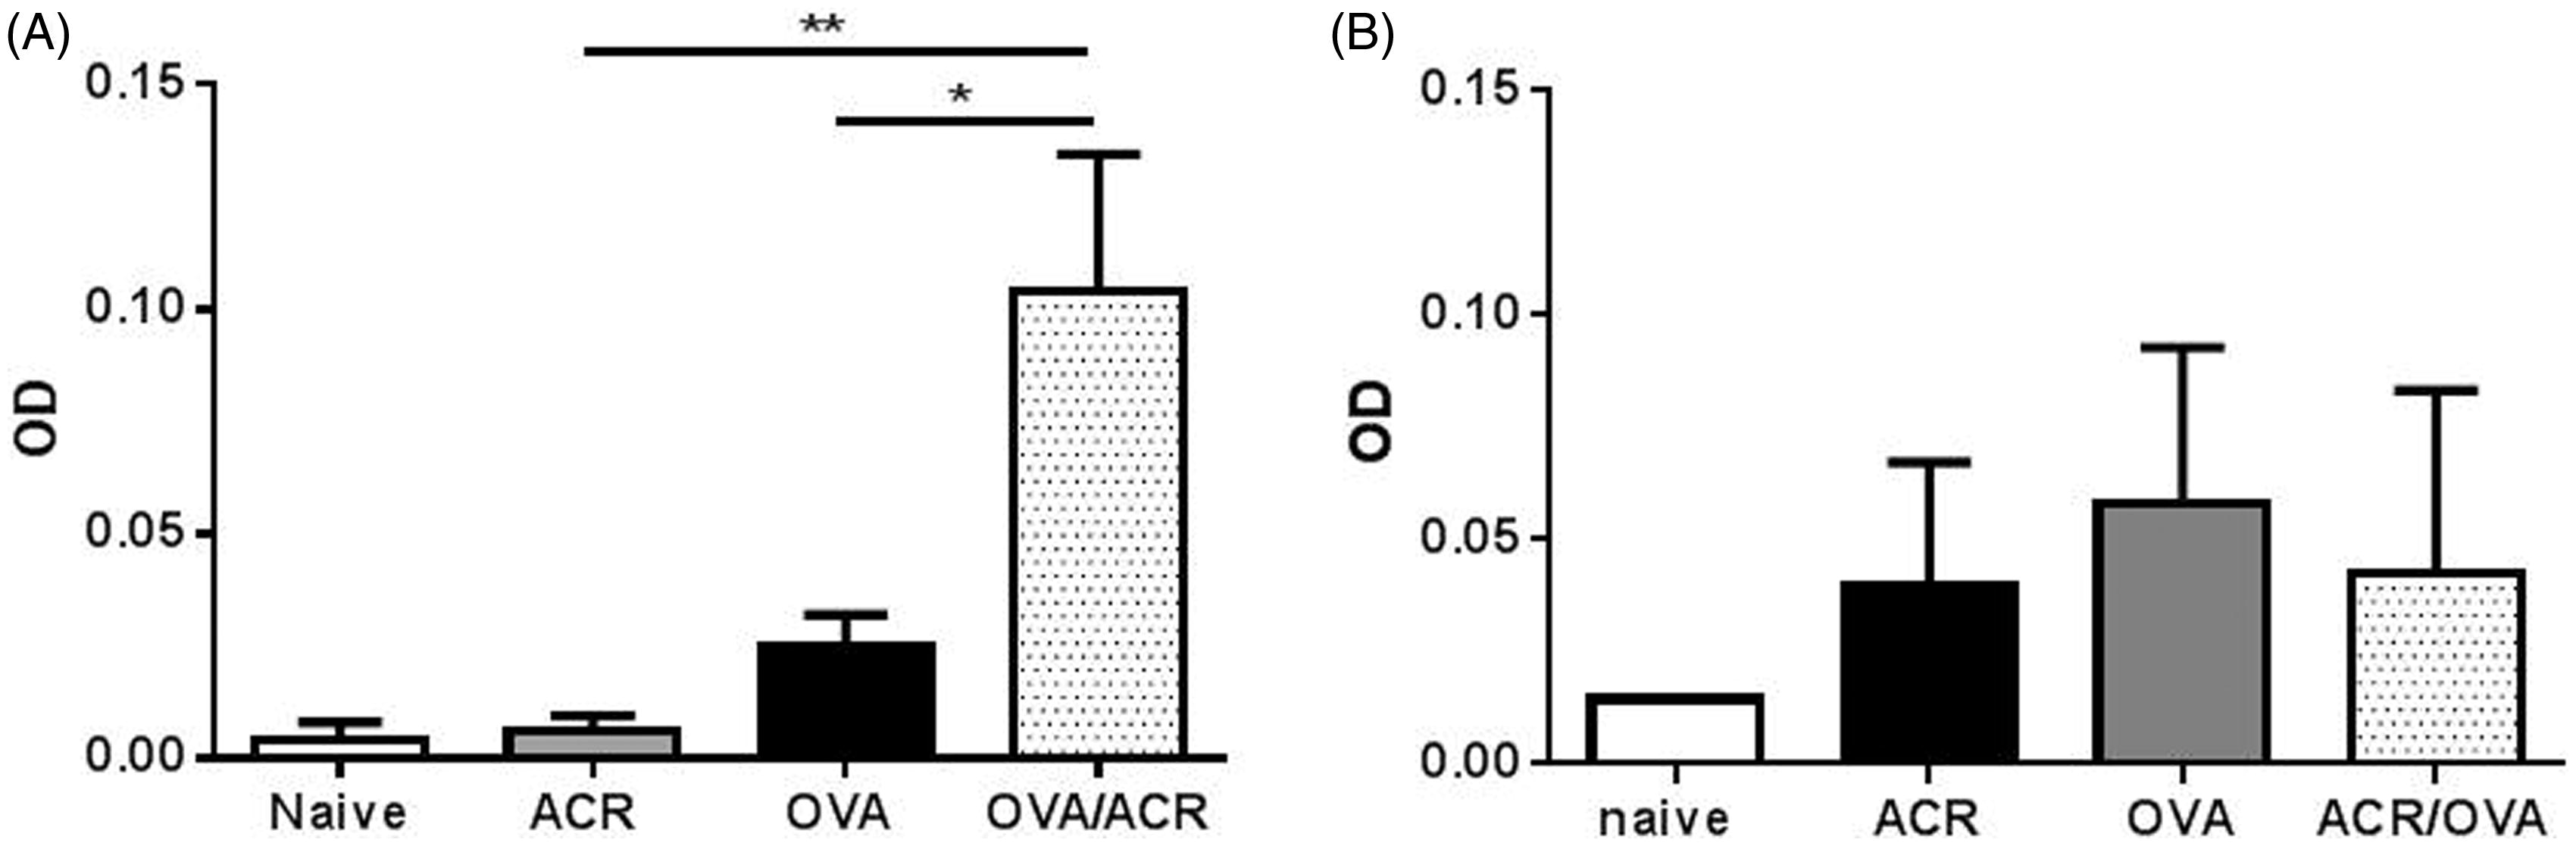 Figure 2. (a) Anti-OVA IgG1 and (b) anti-OVA IgG2a levels in sera from naive, ACR-, OVA- and OVA/ACR-treated animals collected on Day 23. Bars represent mean ± SEM. *p < 0.05 and **p < 0.005 compared between indicated treatment groups. OD, Optical Density. Naive: n = 4; ACR, OVA and OVA/ACR: n = 10–14.